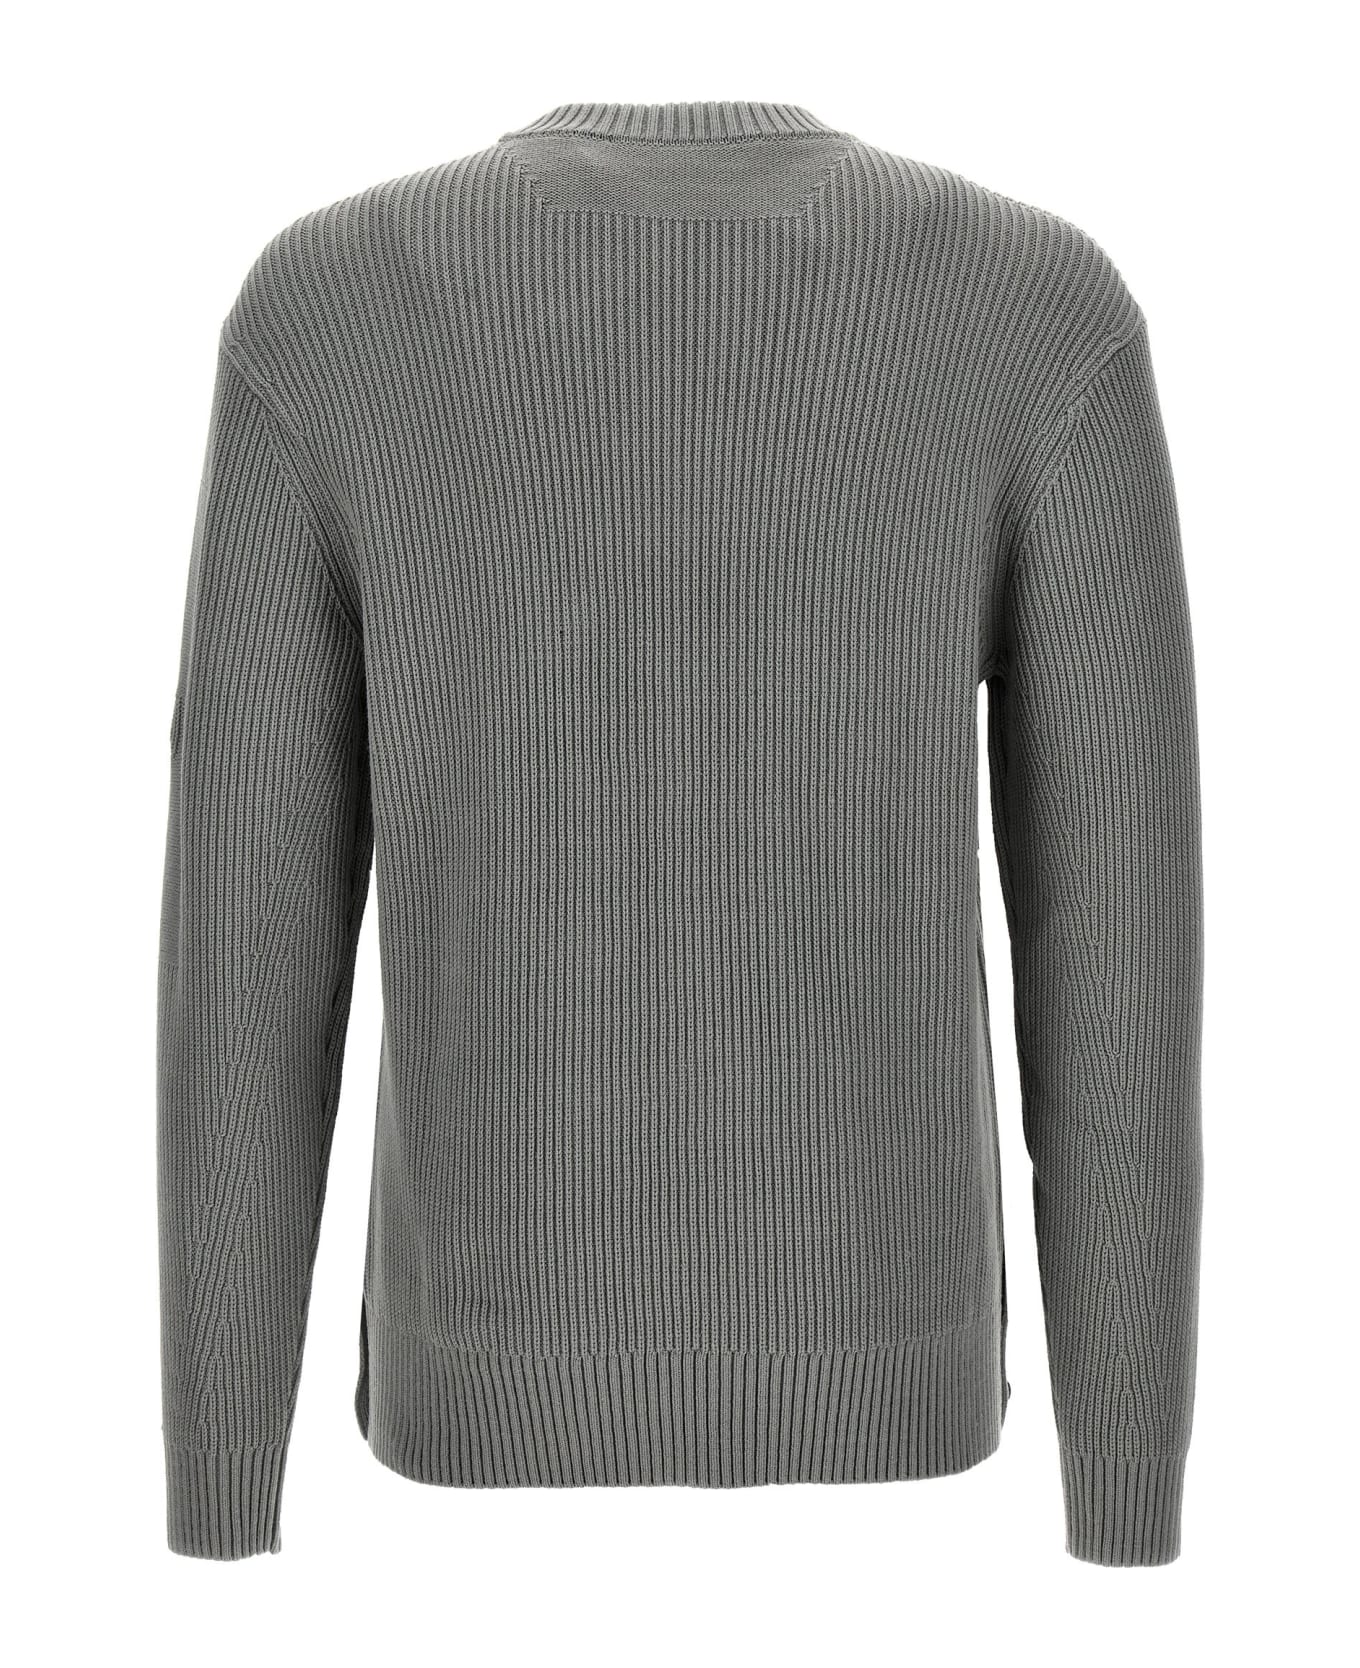 A-COLD-WALL 'fisherman' Sweater - Gray